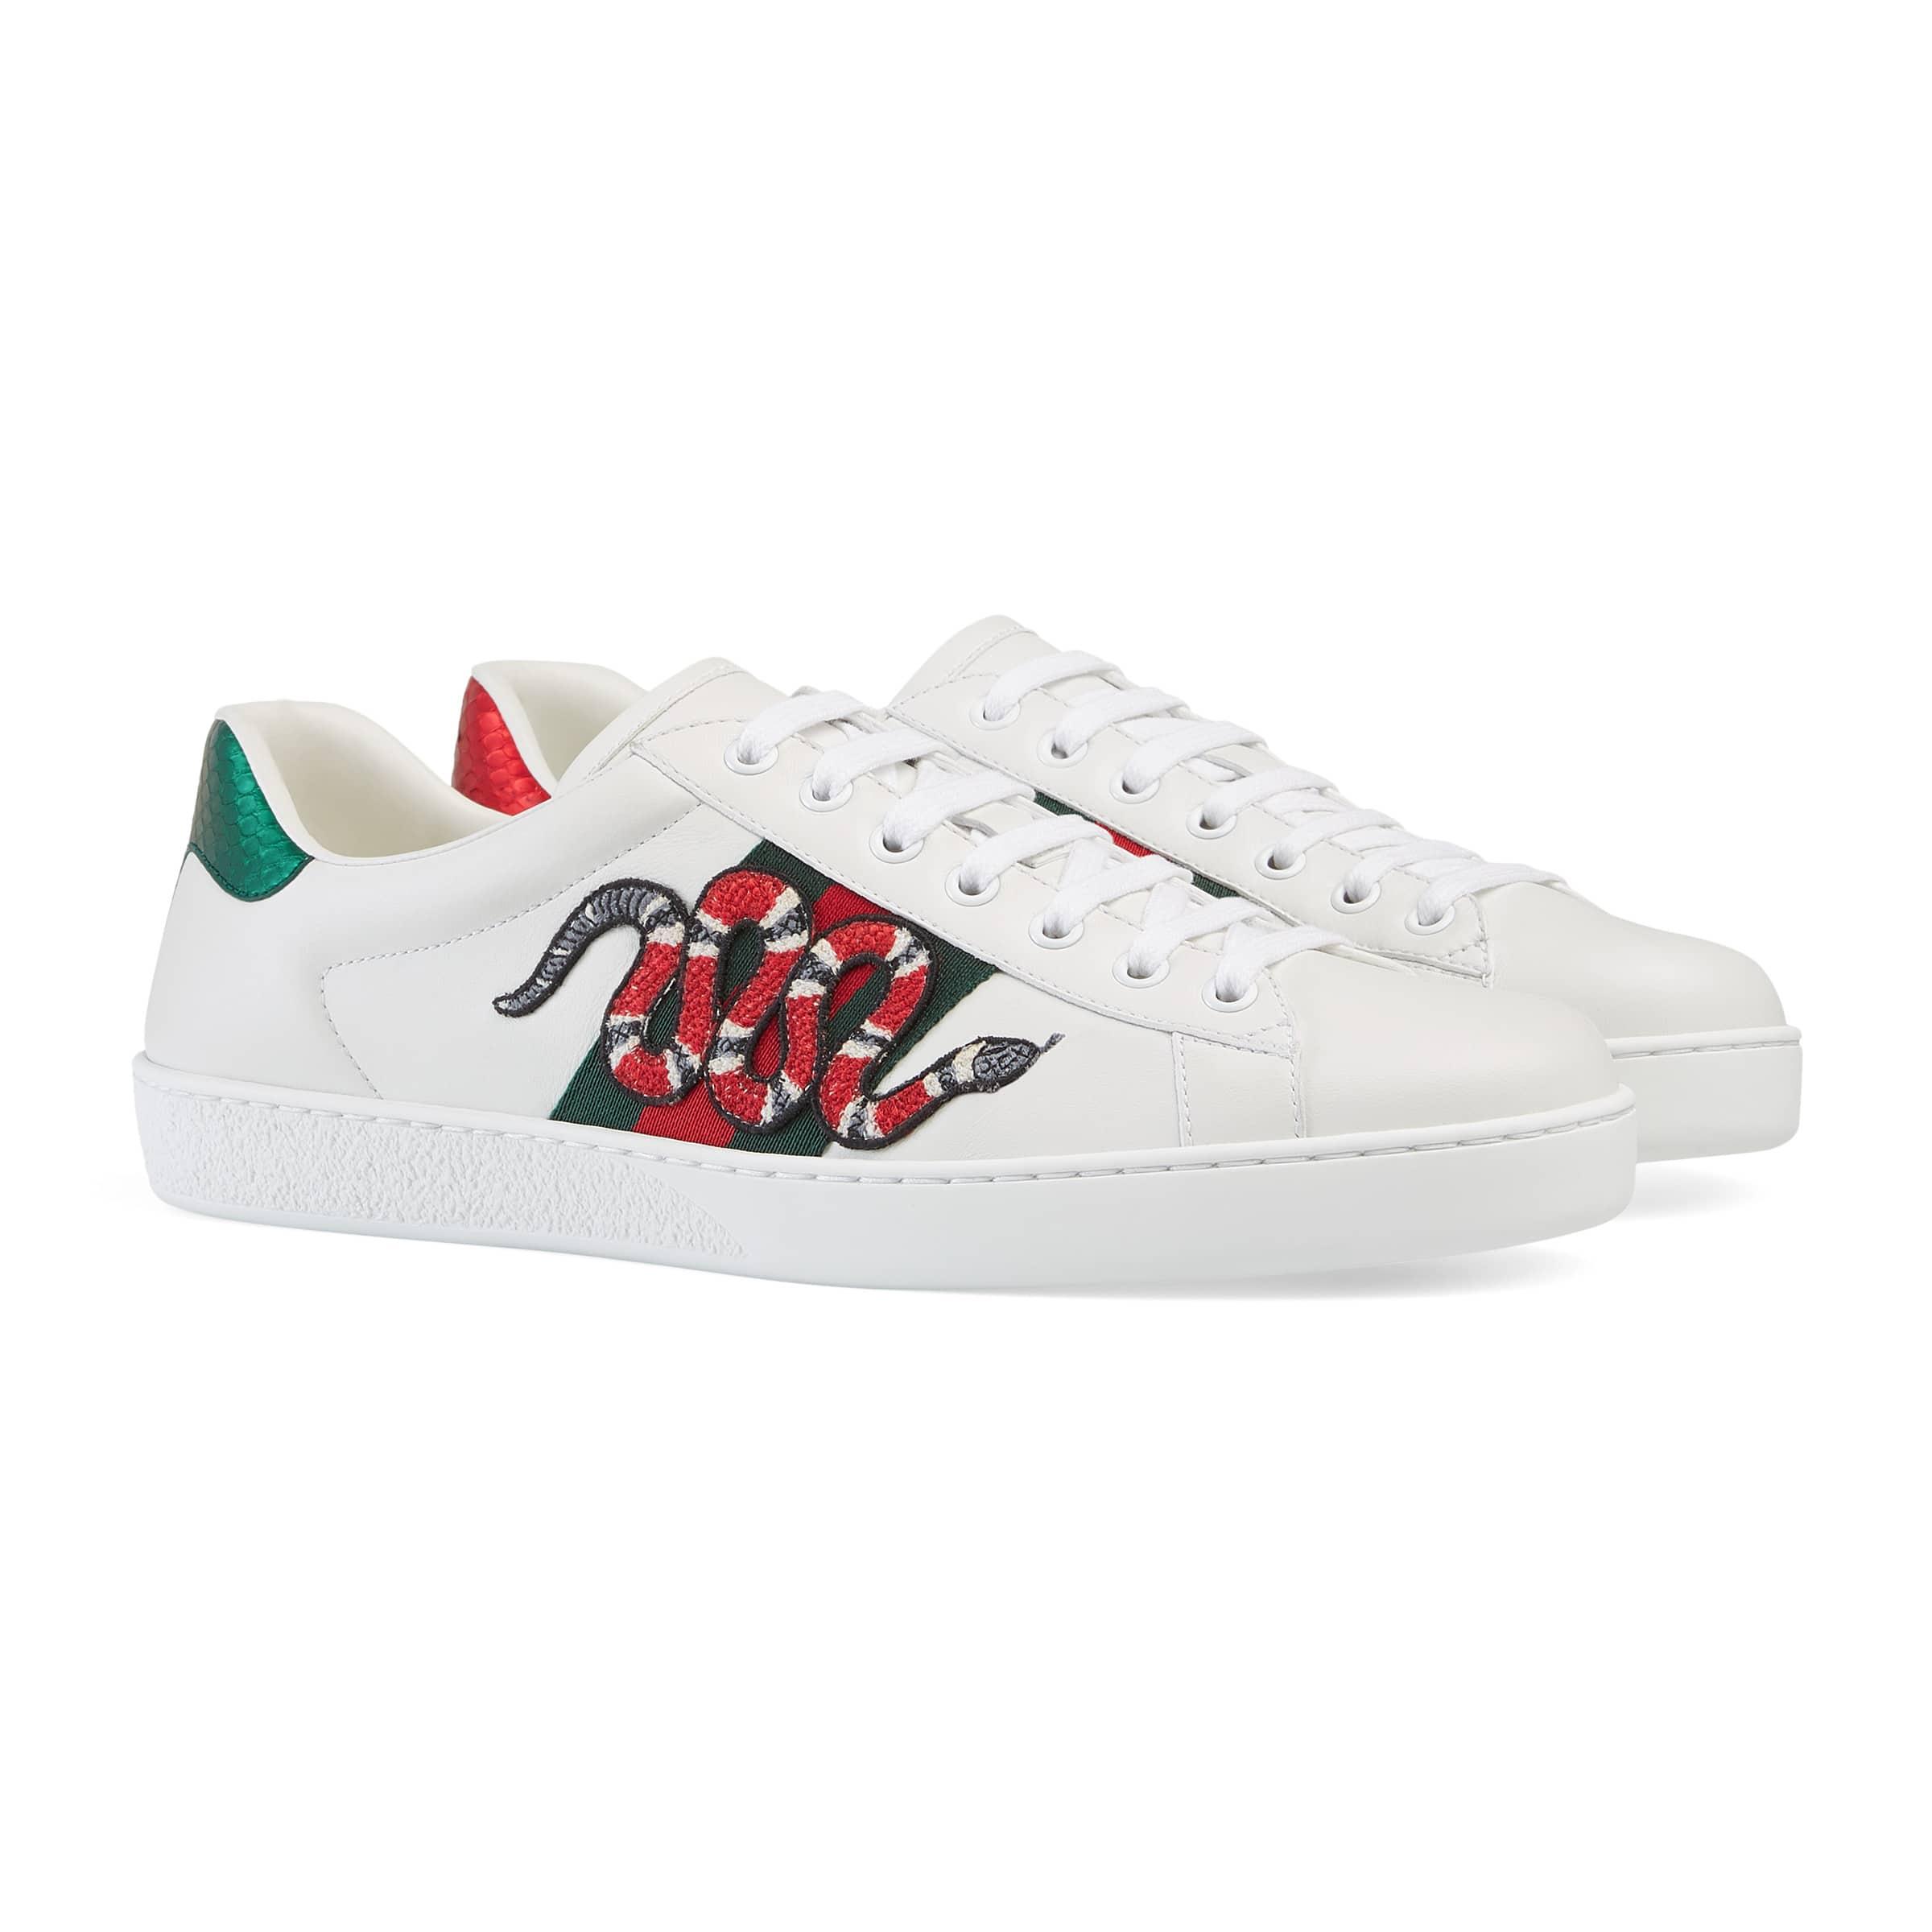 Gucci Leather Ace Embroidered Sneaker in White for Men - Save 50% | Lyst